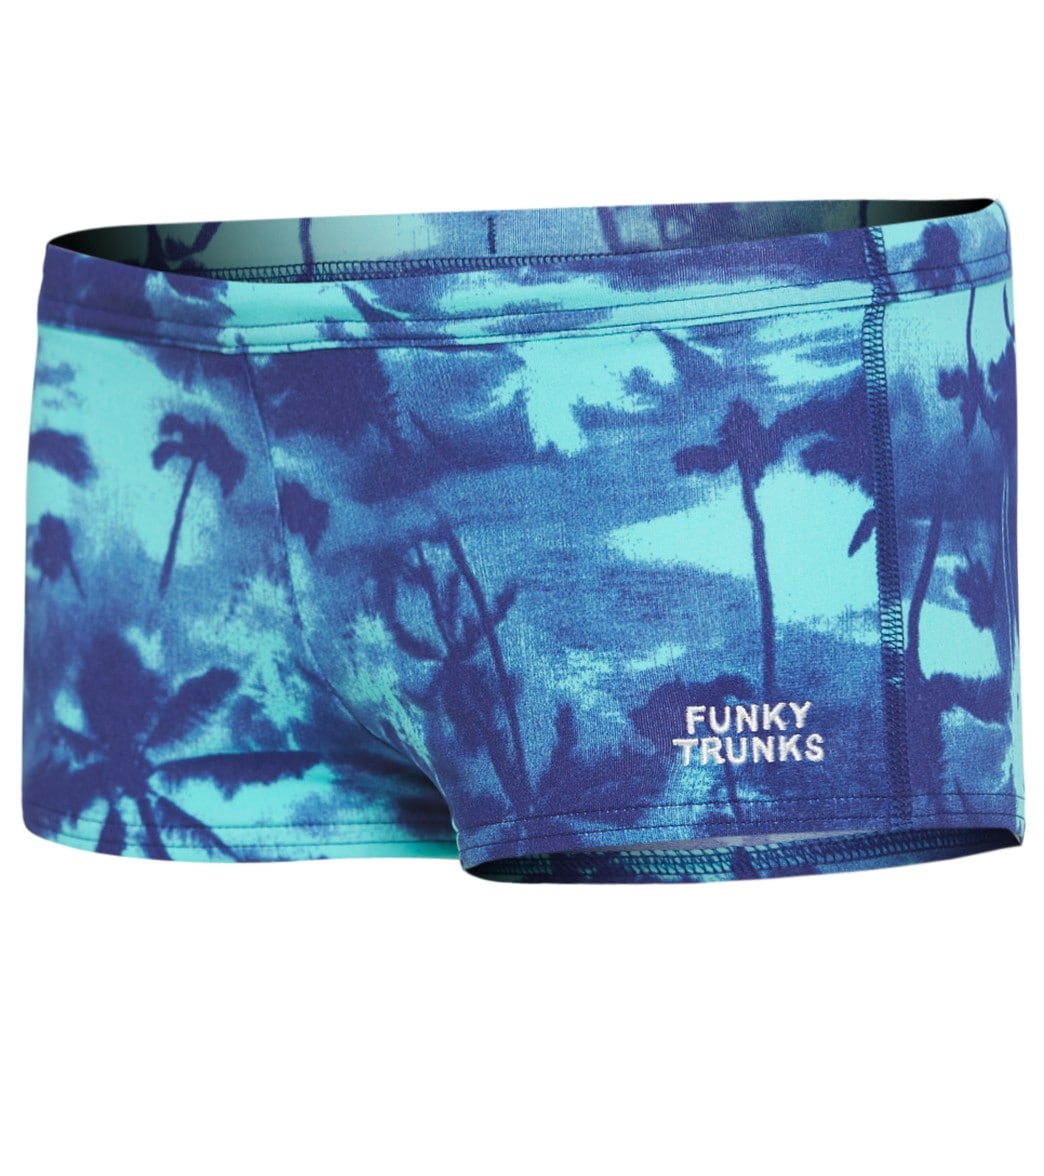 Funky Trunks Toddler Boys' Hawaiian Skies Square Leg Trunk Swimsuit - Blue/Navy 1T Polyester - Swimoutlet.com